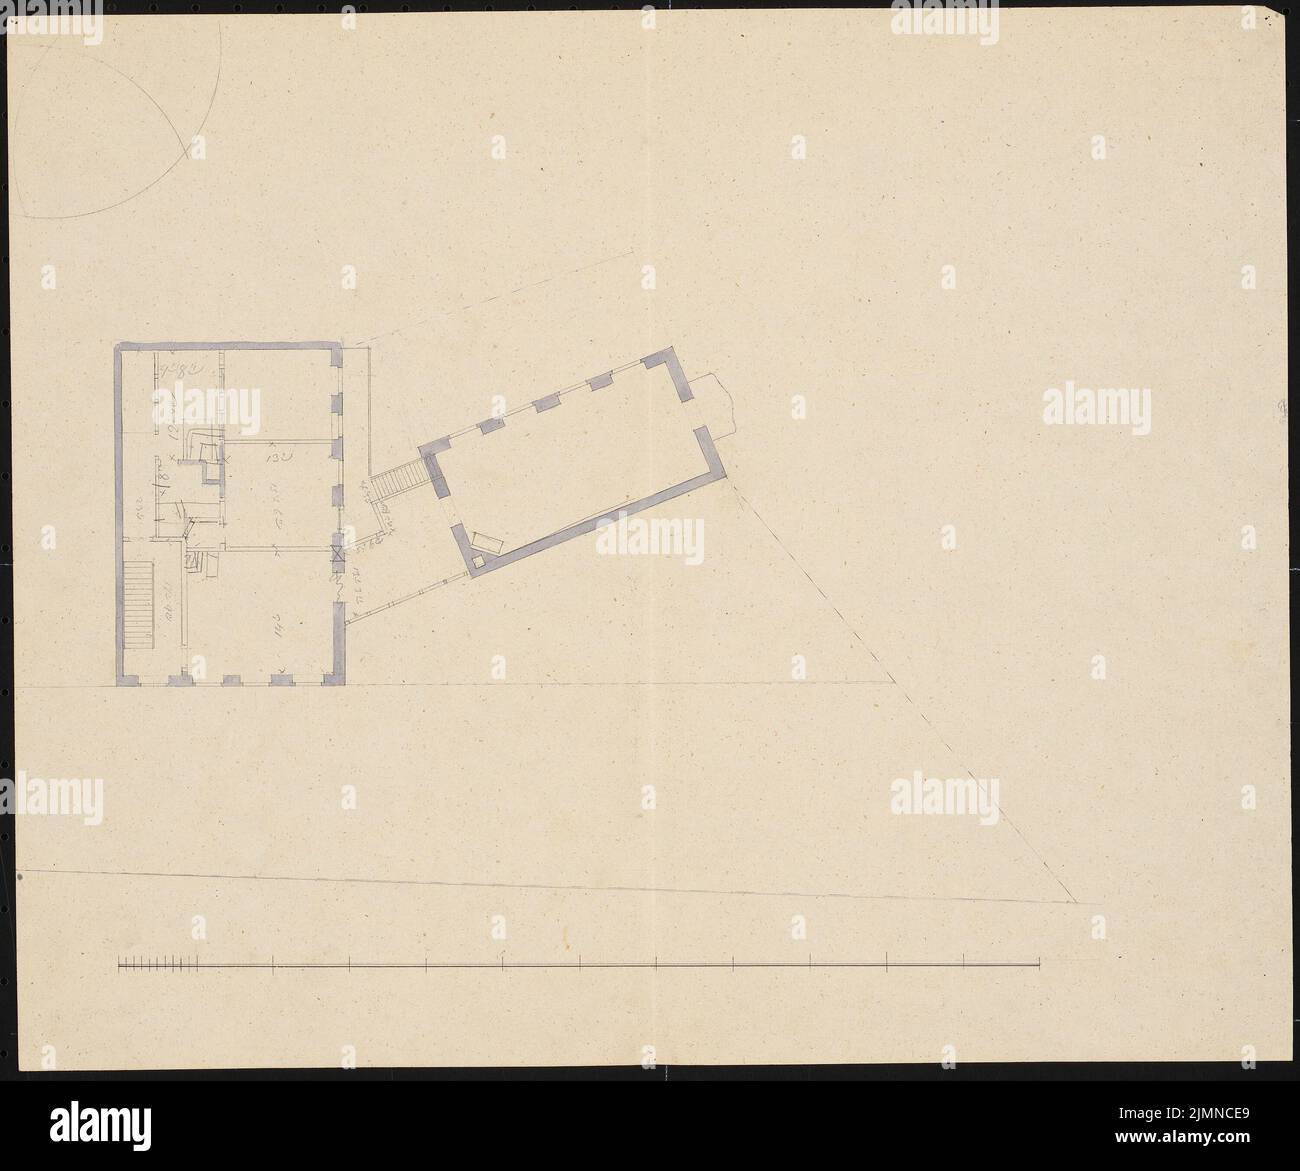 Knoblauch Eduard (1801-1865), Paddengasse residential building in Berlin. Conversion (1843): floor plans. Ink and pencil watercolored, 36.1 x 43.4 cm (including scan edges) Stock Photo